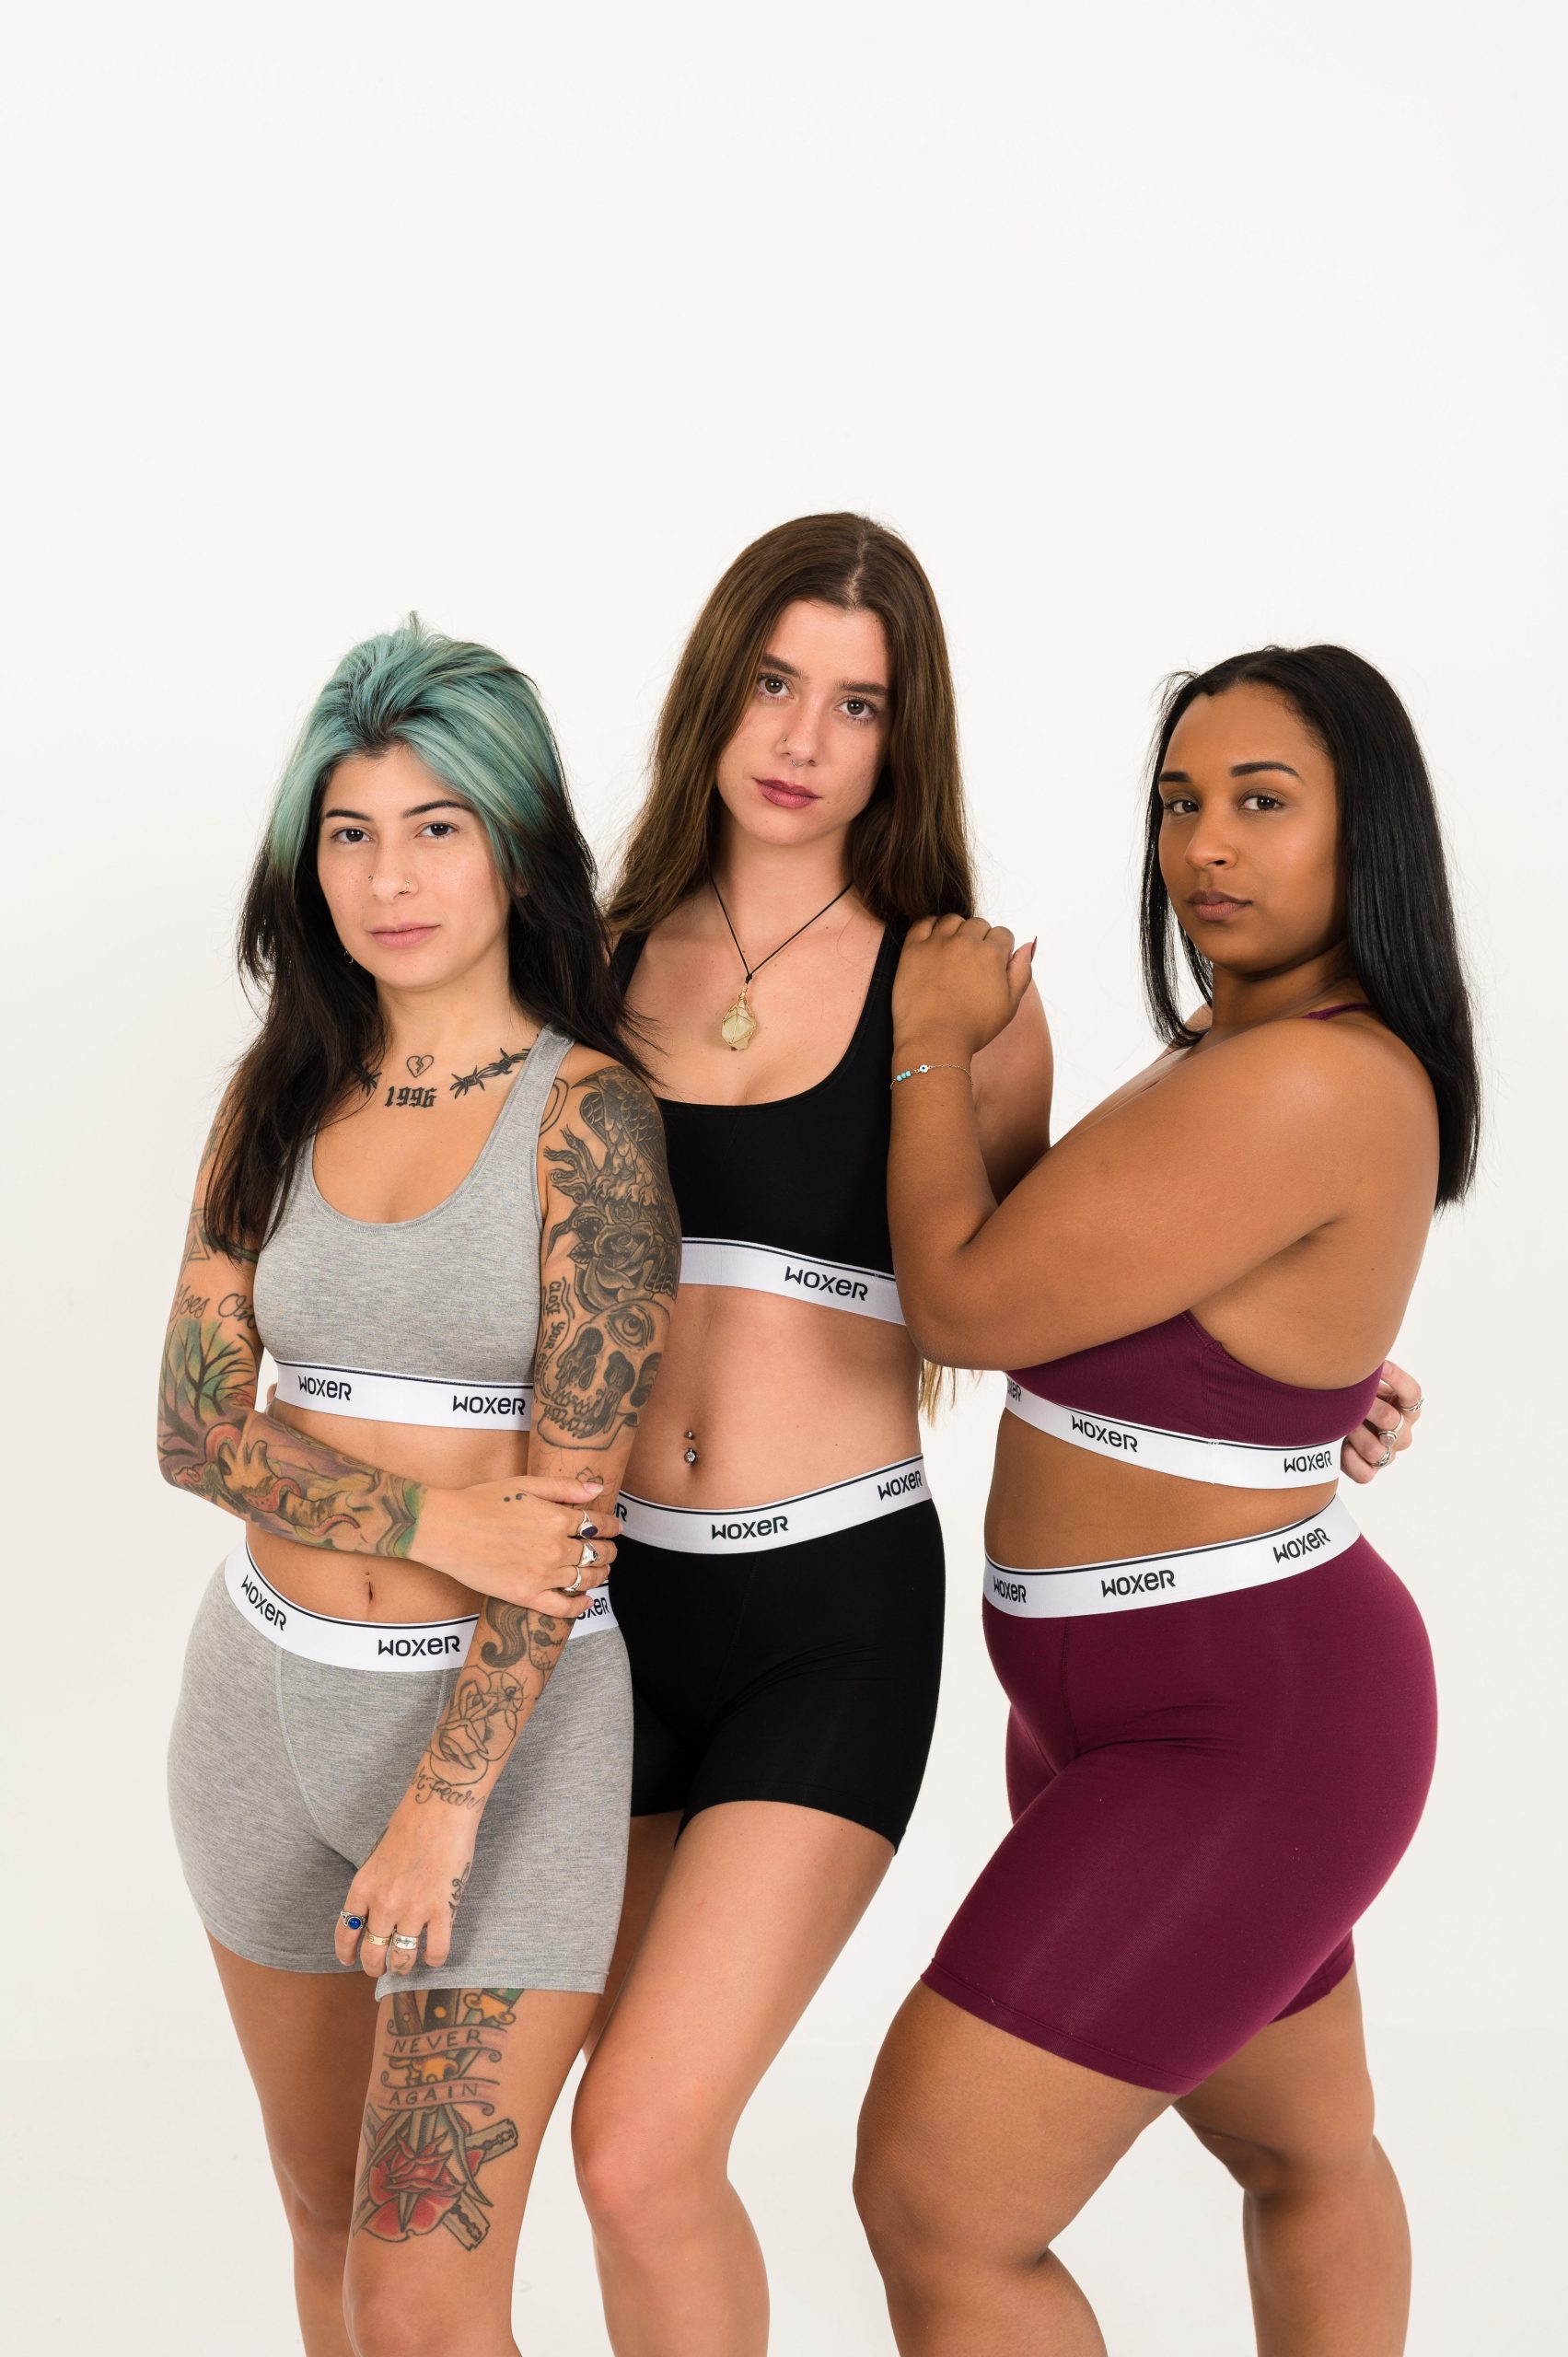 Woxer BOSS Bralette: Inclusive Sizing & Sustainably Made. by Alexandra  Fuente — Kickstarter